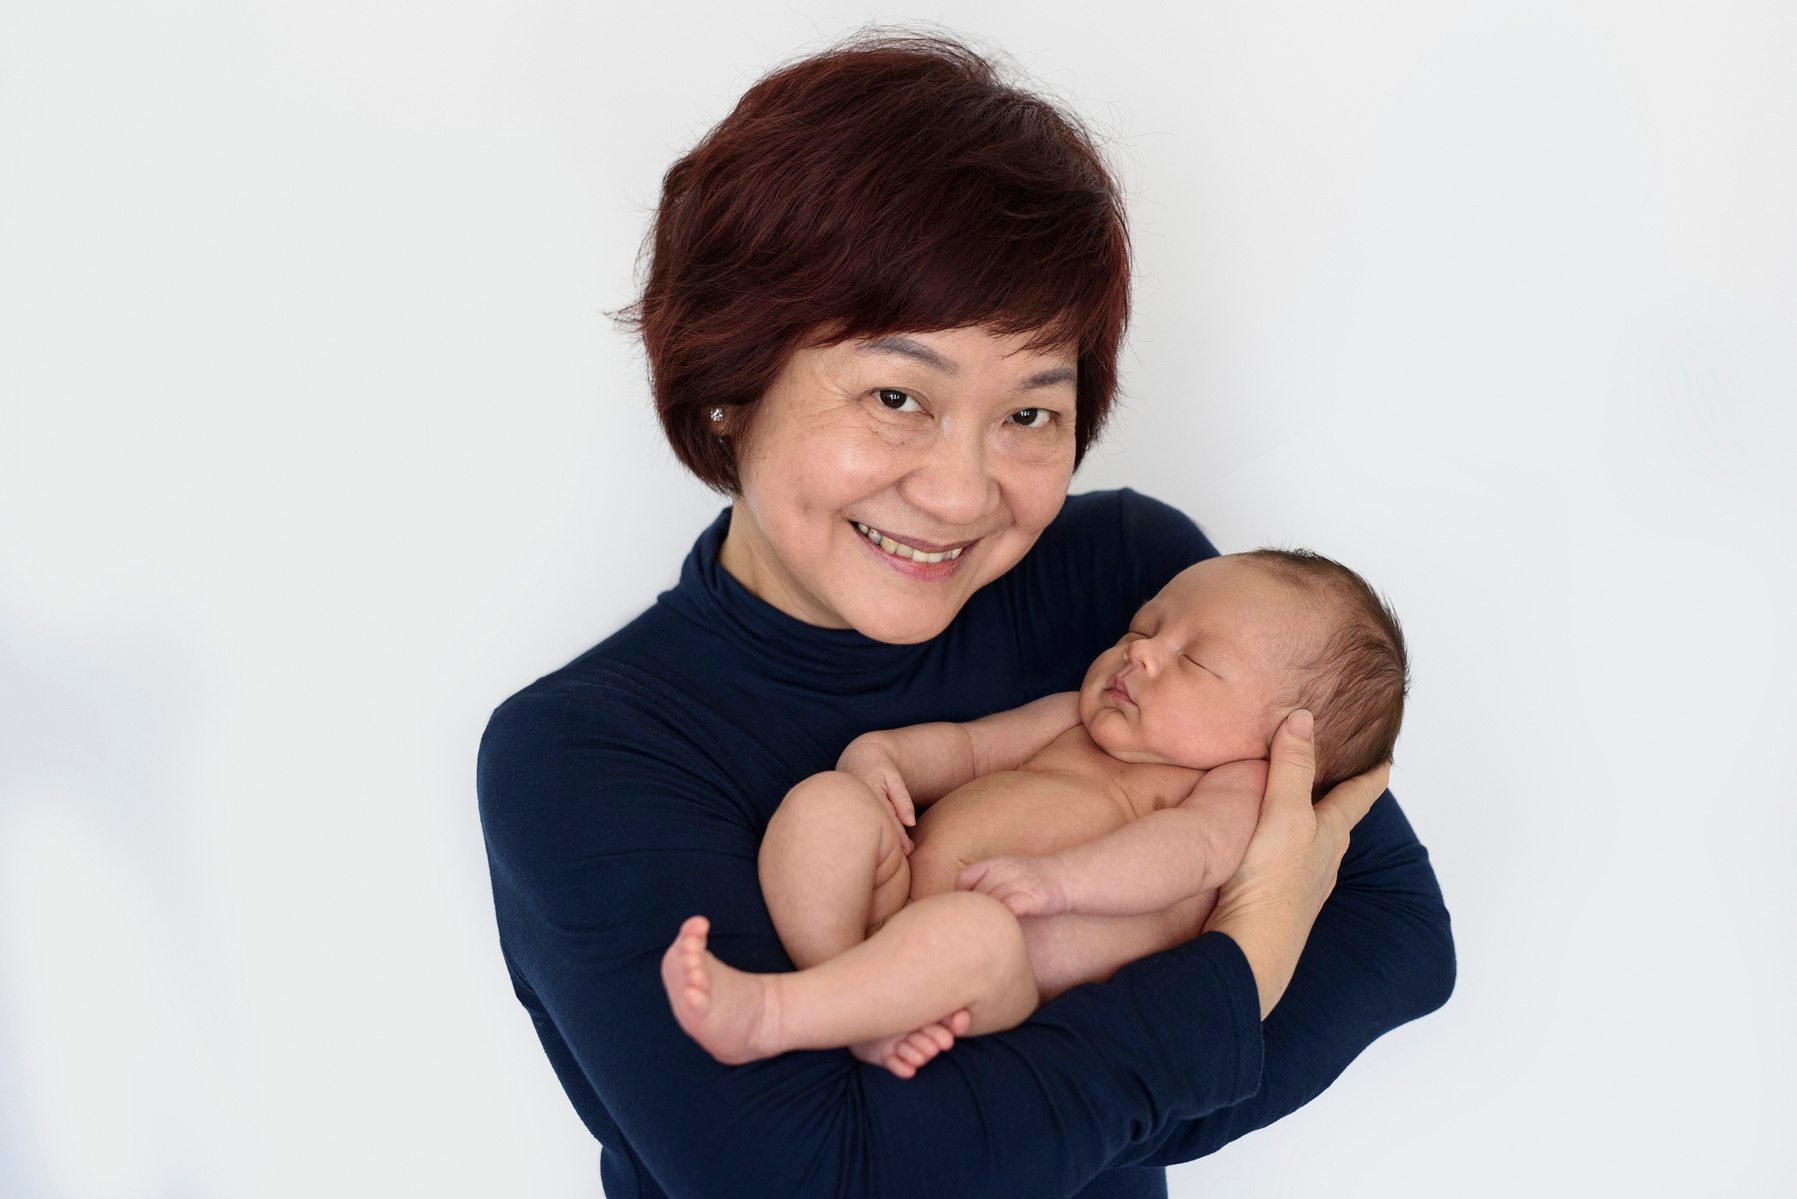 Grandmother cradles her newborn baby grandson in her arms for beautiful professional family portrait. Photographed by Geneva's leading portrait photographer, Helen Putsman, based in Chêne-Bougeries.